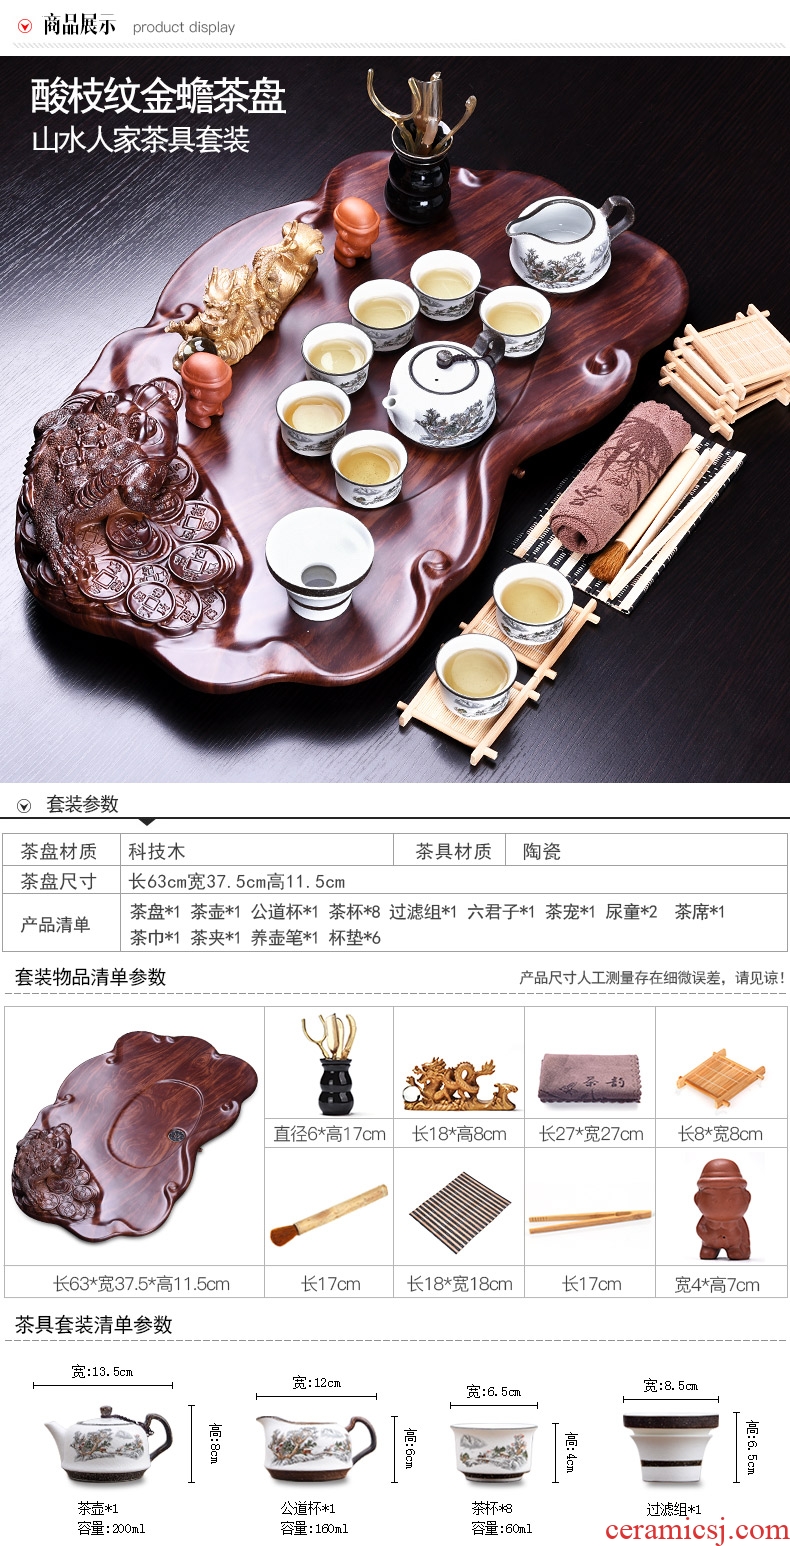 HaoFeng ecological wood tea tray package ceramic purple mountains and waters of a complete set of ice to crack kung fu tea set